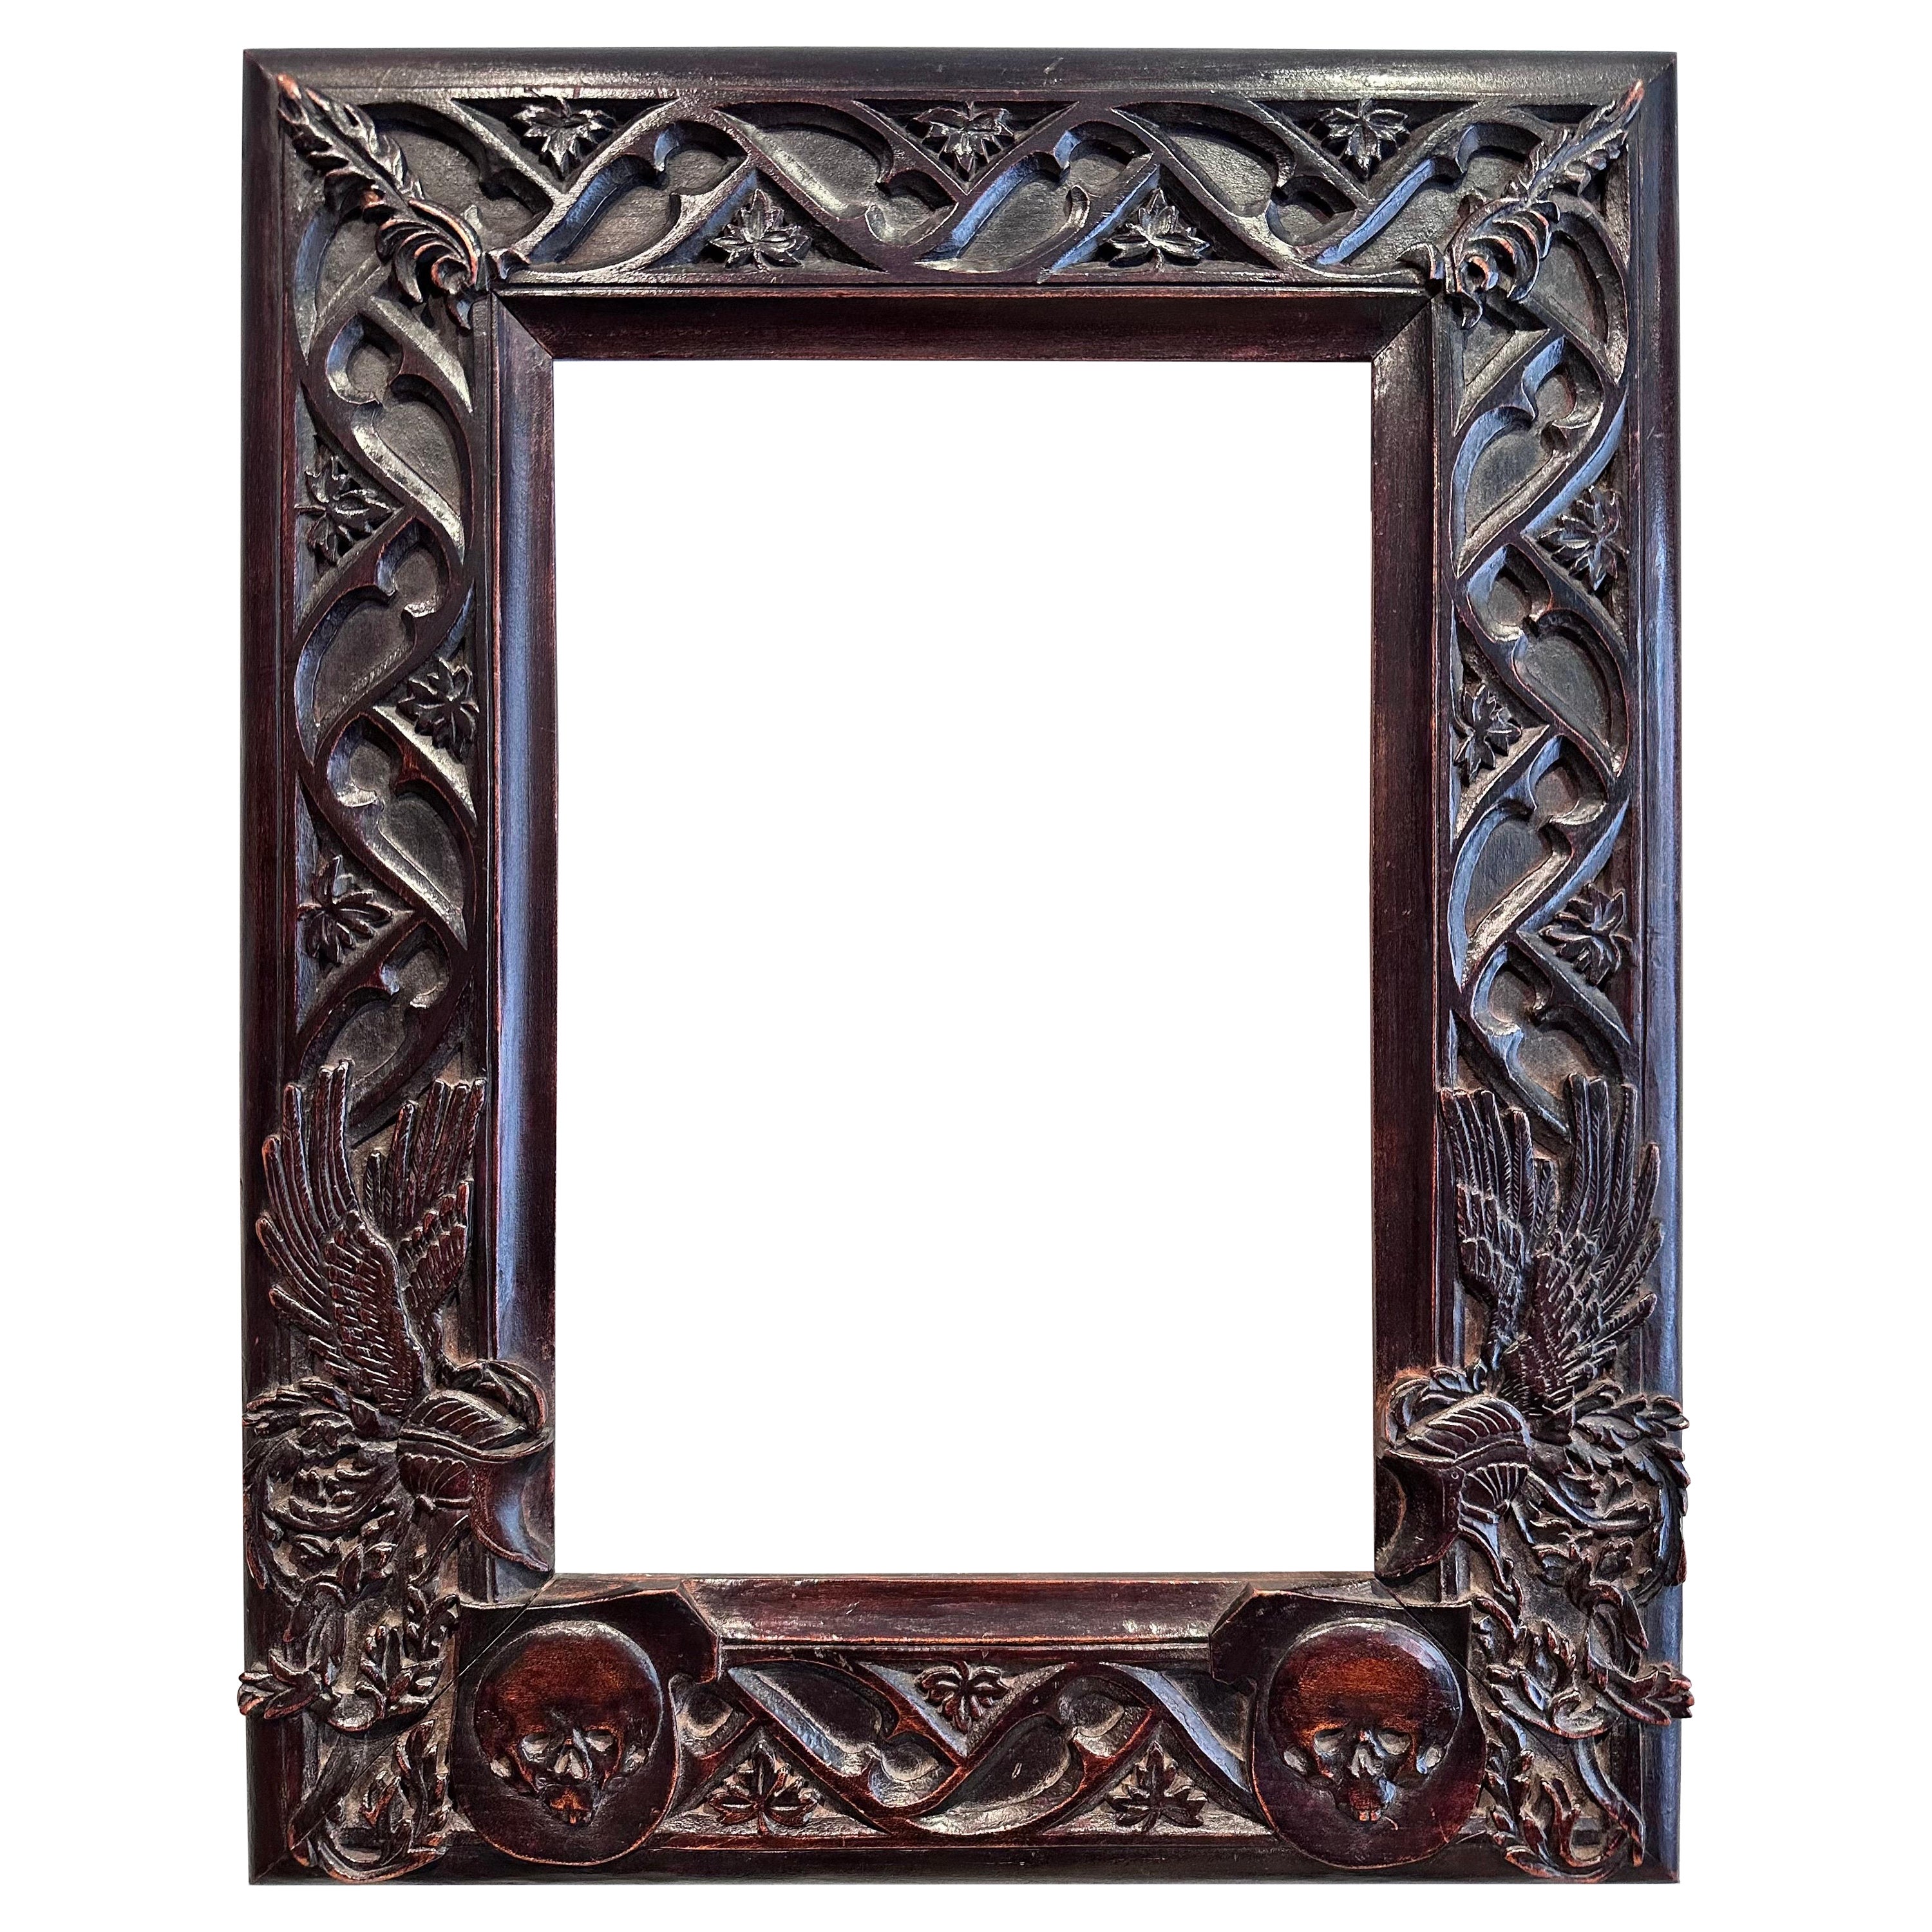 “Skull” Frame, Carved Wood 19th 1860-1880 Specially Created for Dürer Engraving  For Sale